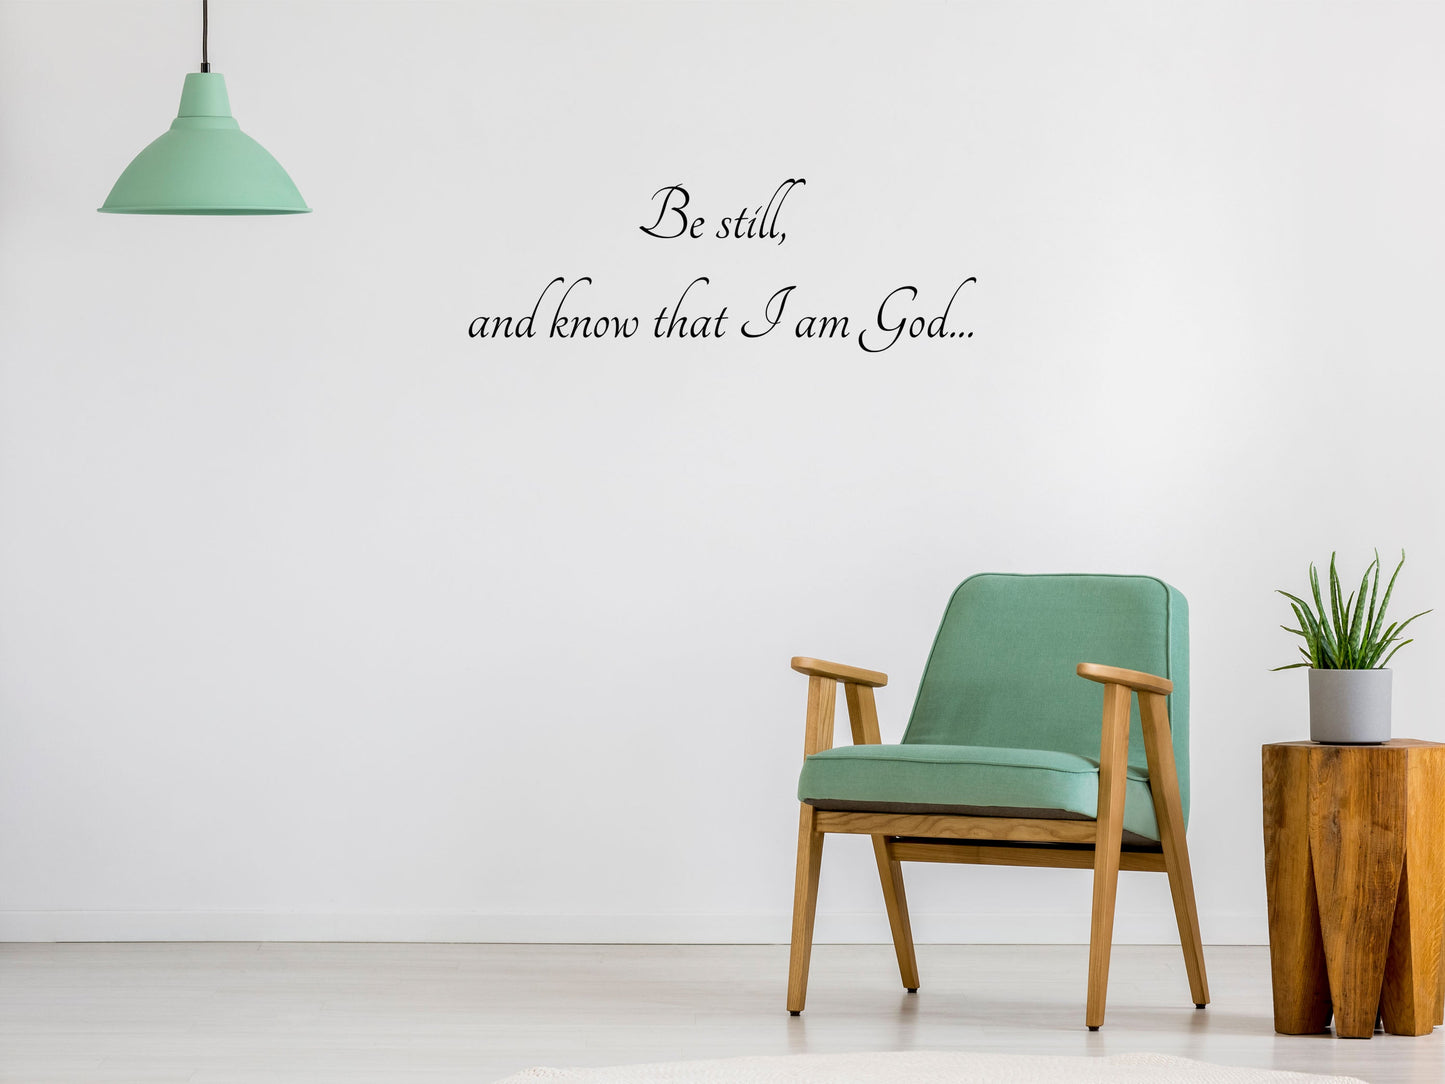 Be Still and Know that I am - God Scripture Wall Decals Vinyl Wall Decal Inspirational Wall Signs 